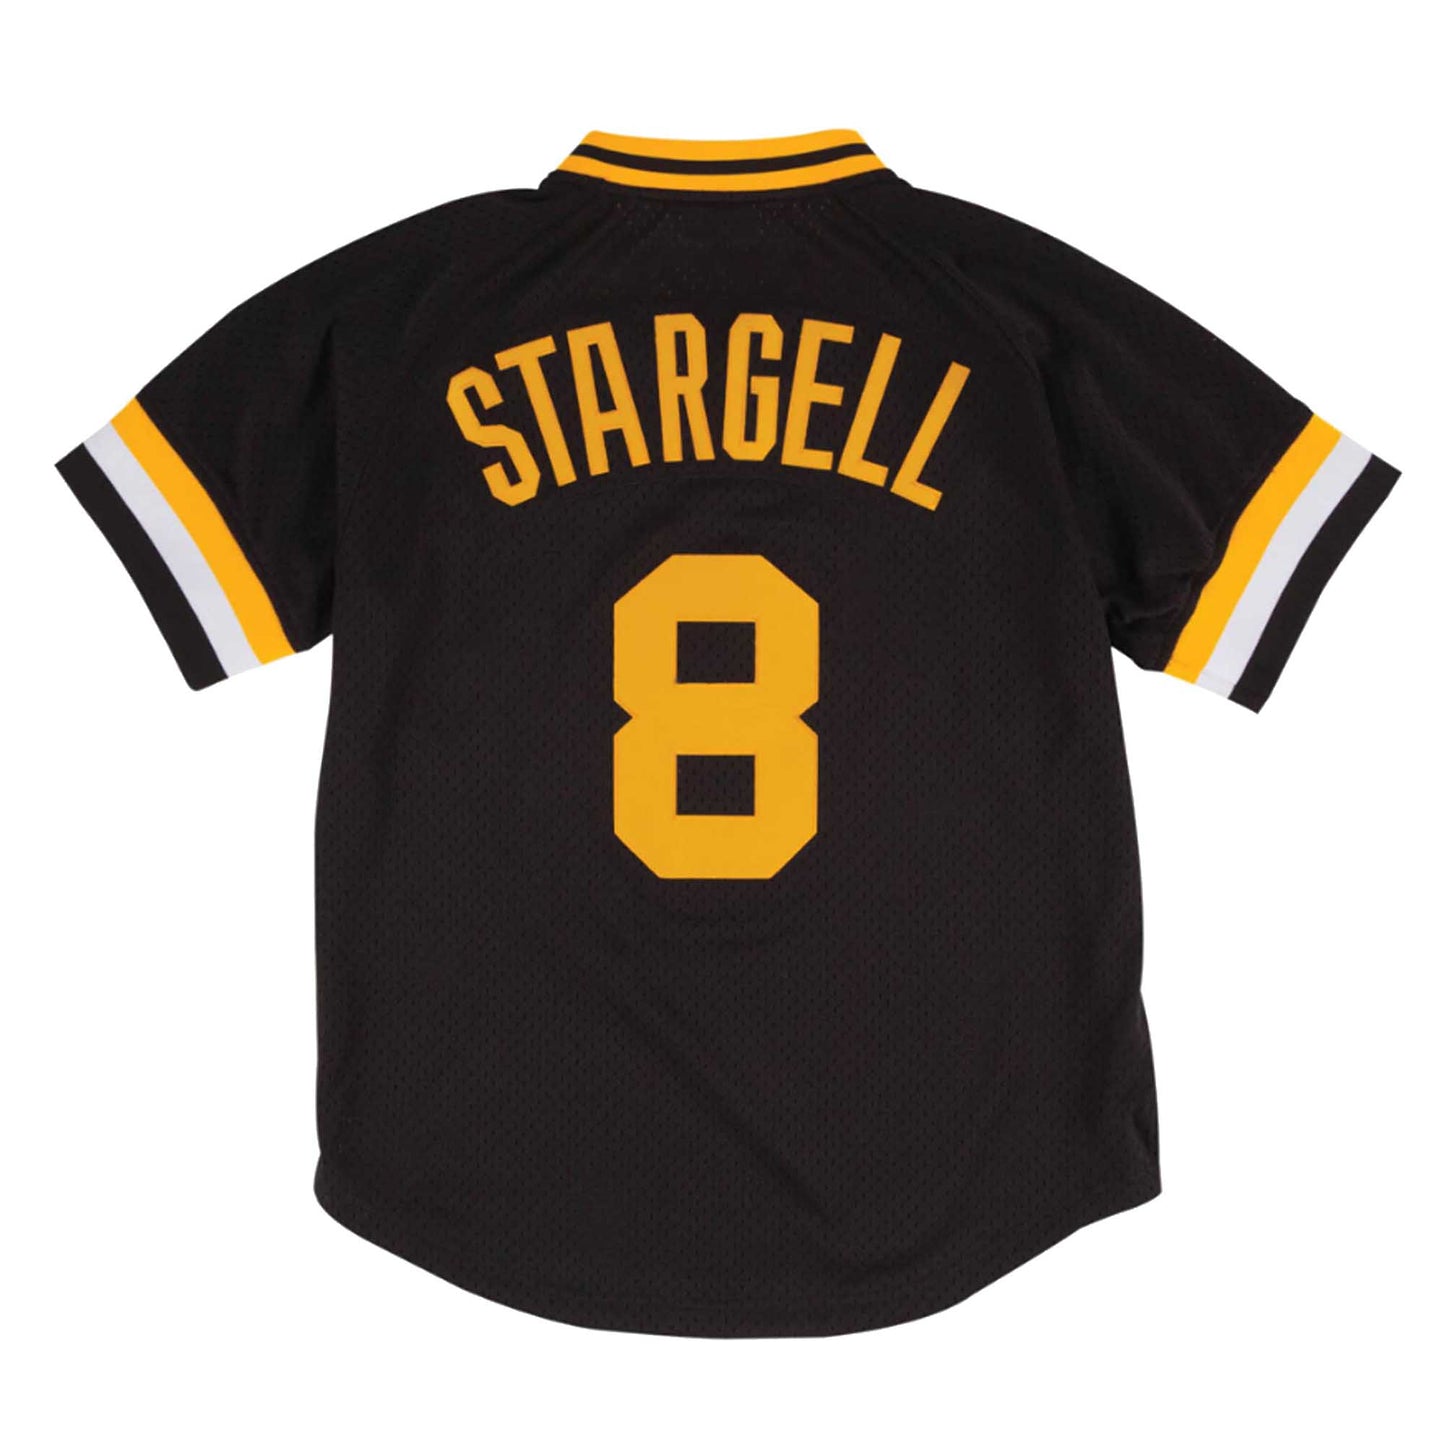 MLB Authentic BP Jersey Pittsburgh Pirates 1982 Willie Stargell #8